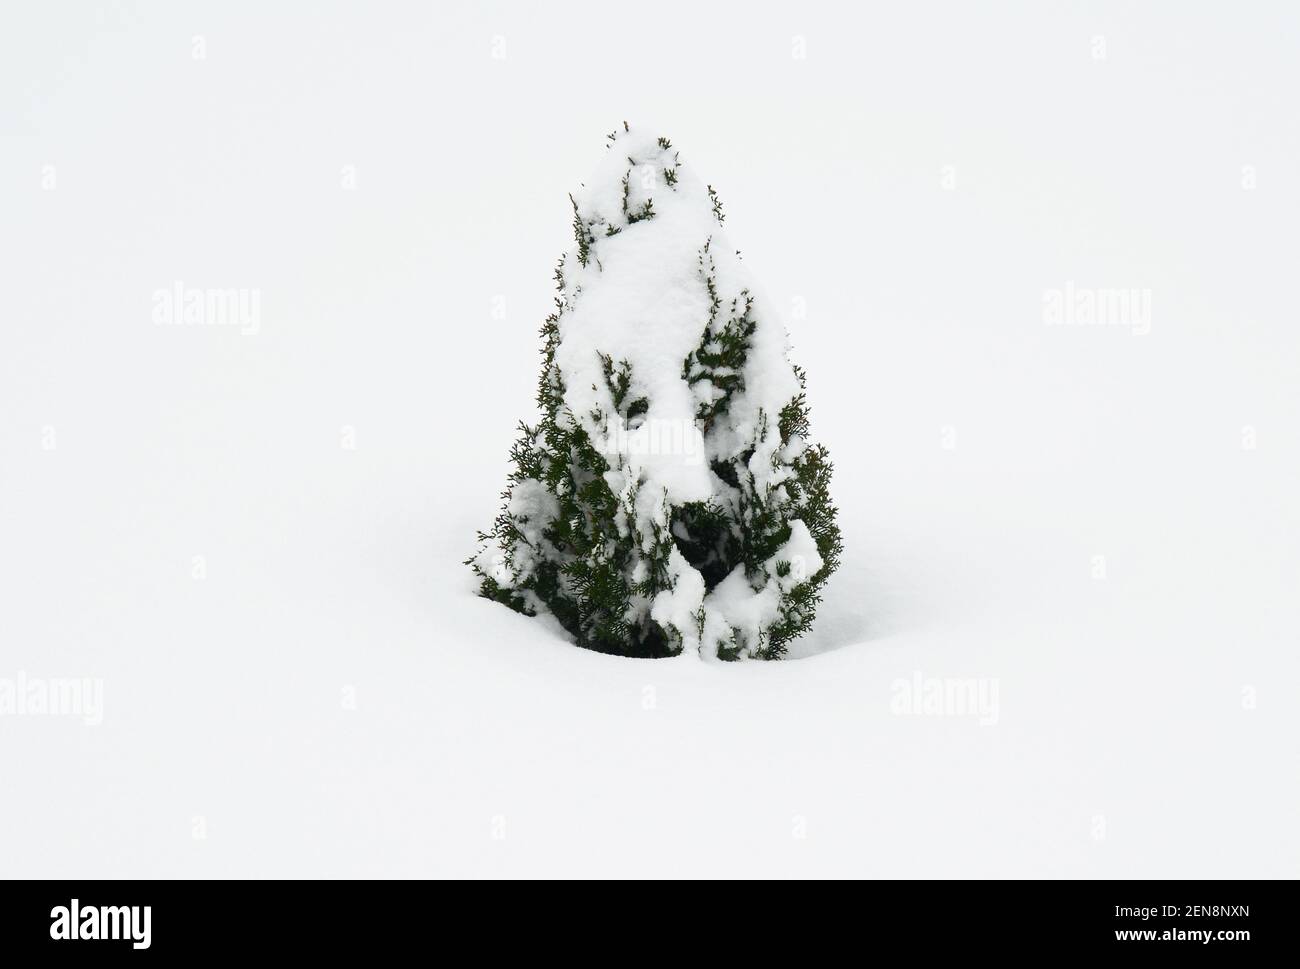 Small thuja, evergreen tree covered with heavy snow. Winter care of arborvitae, so that snow does not harm thuja branches. Stock Photo